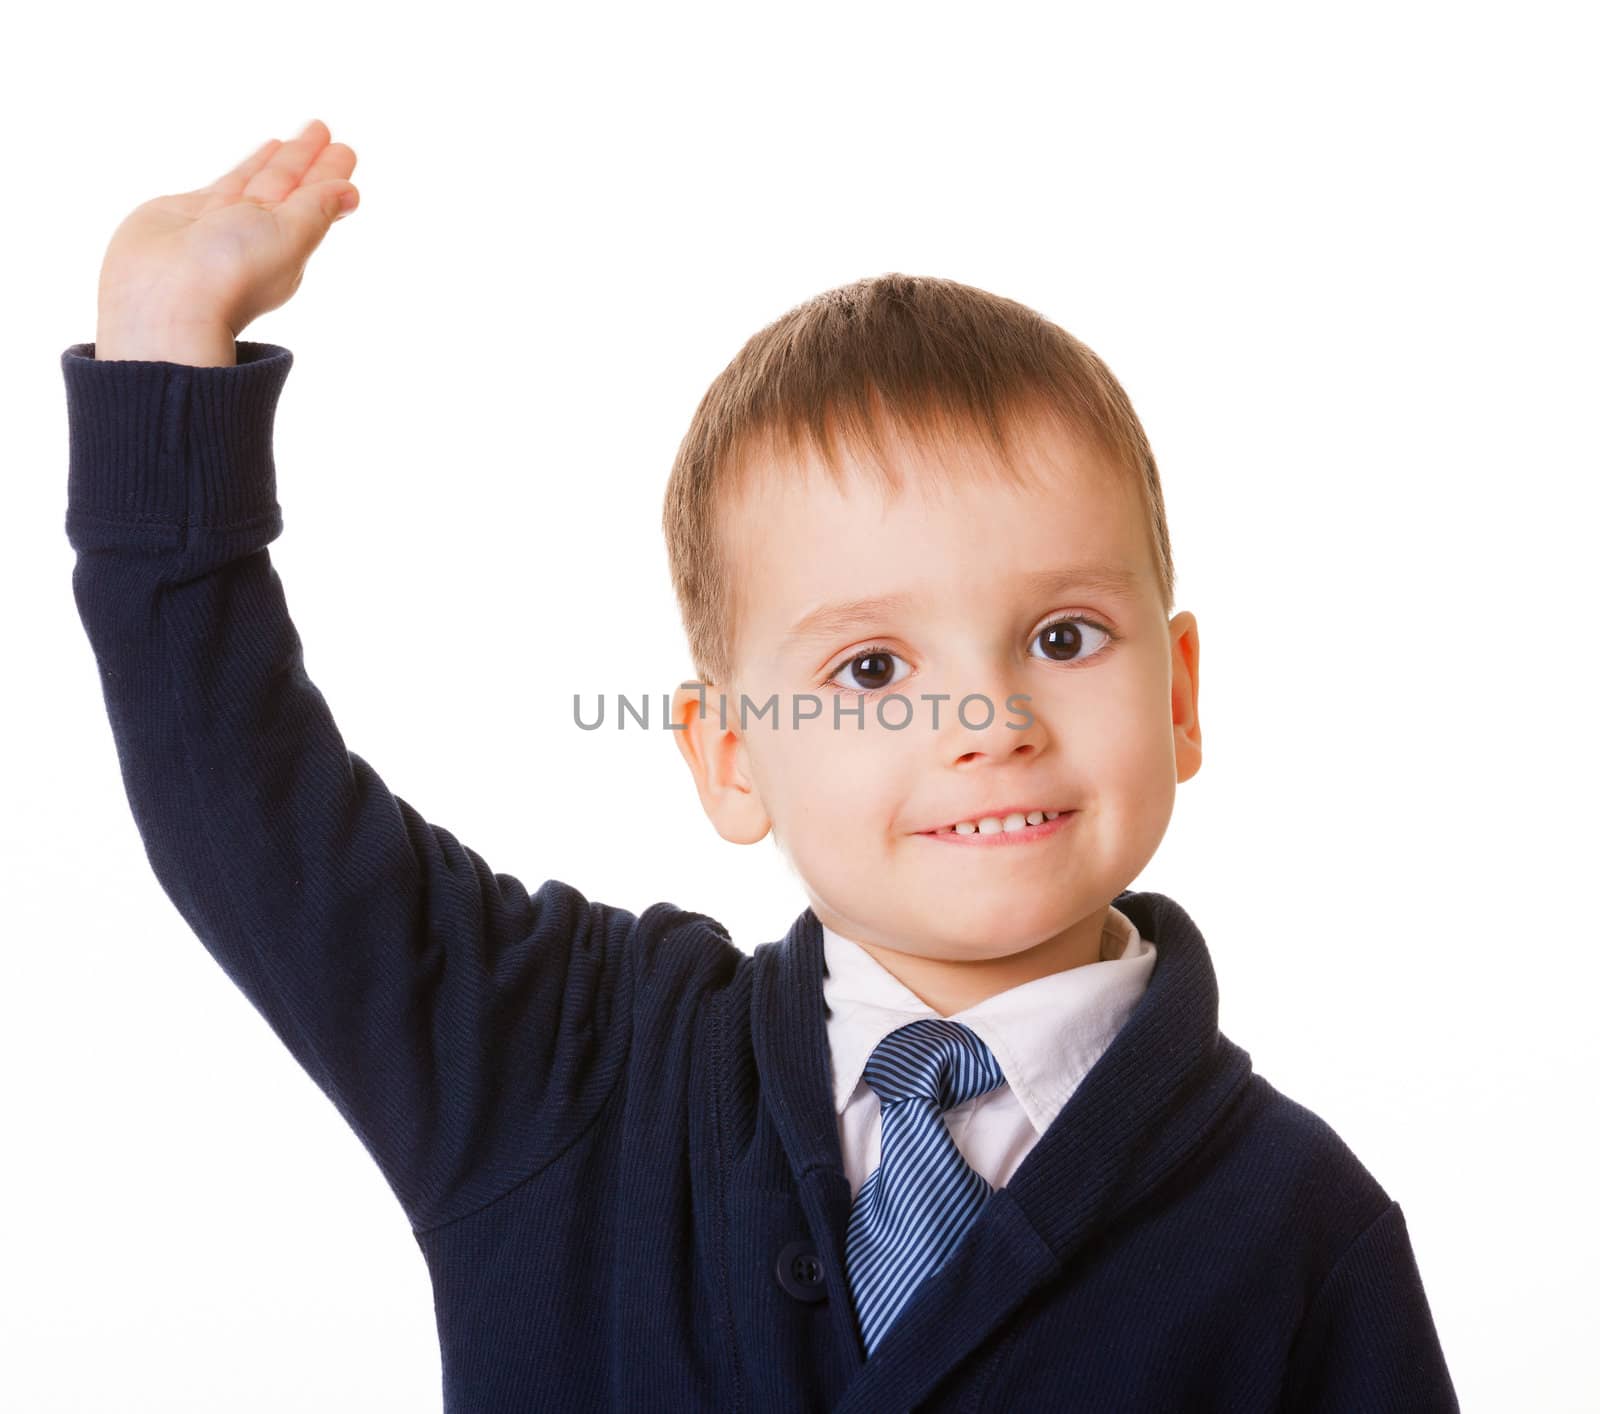 Small schoolboy raises his hand for answer, isolated on white background